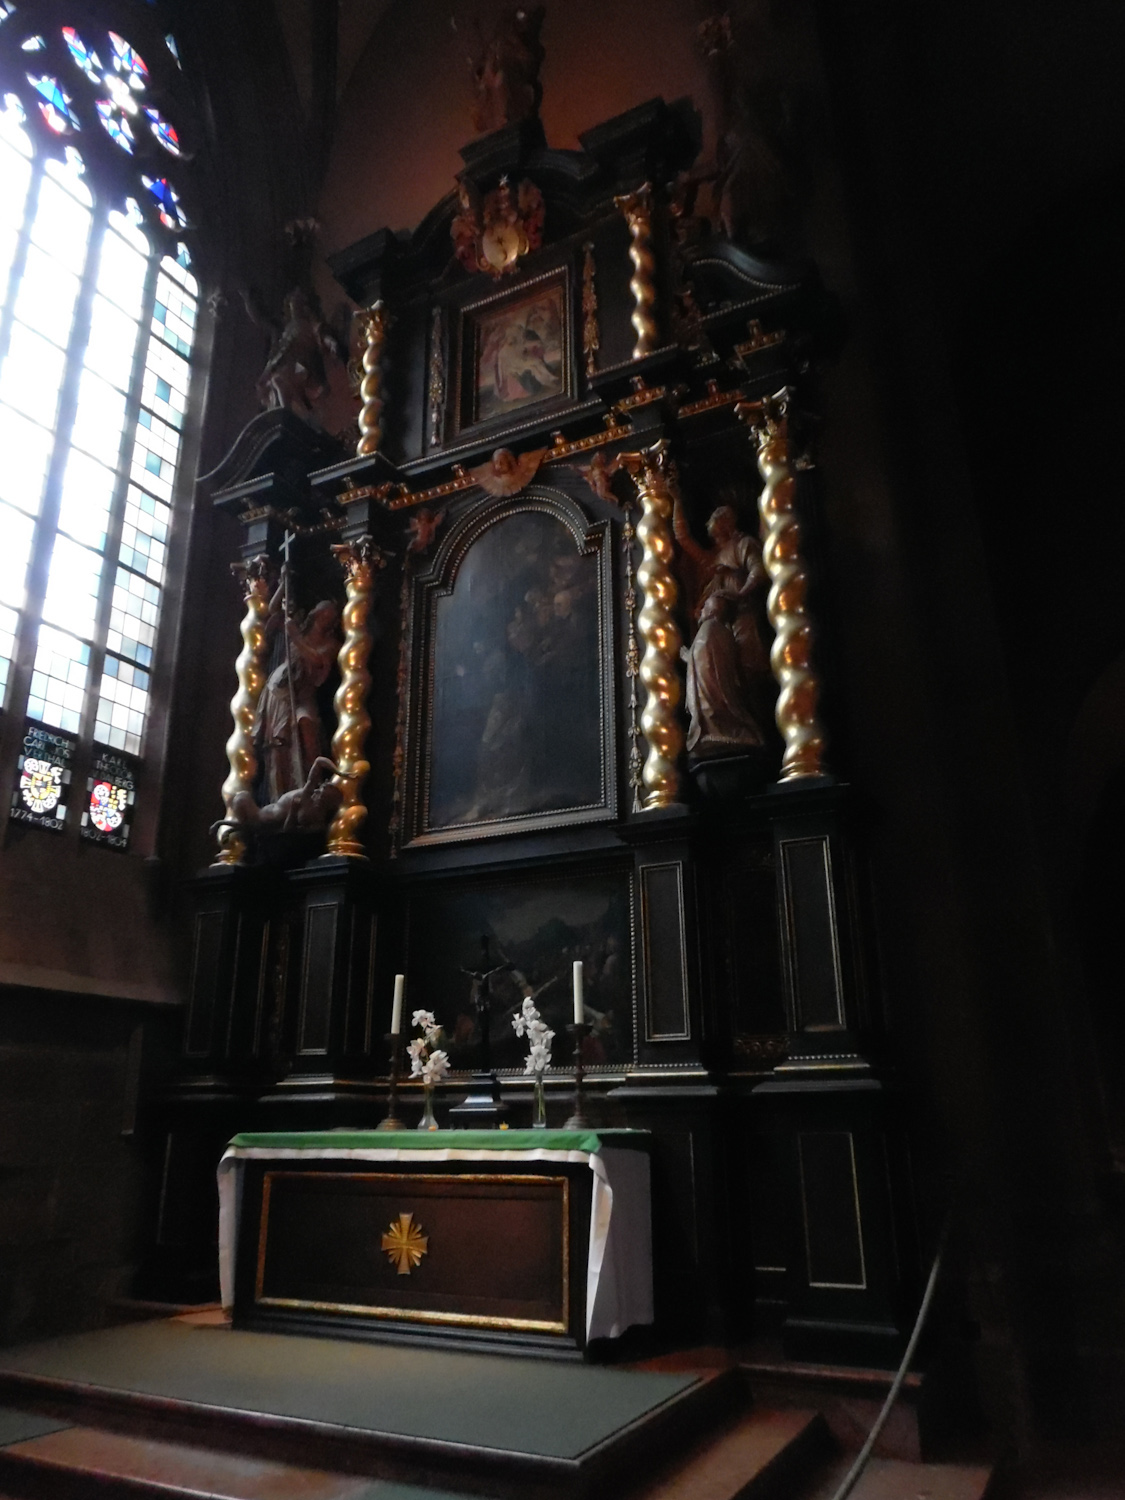 Inside the 10th century Mainz Cathedral